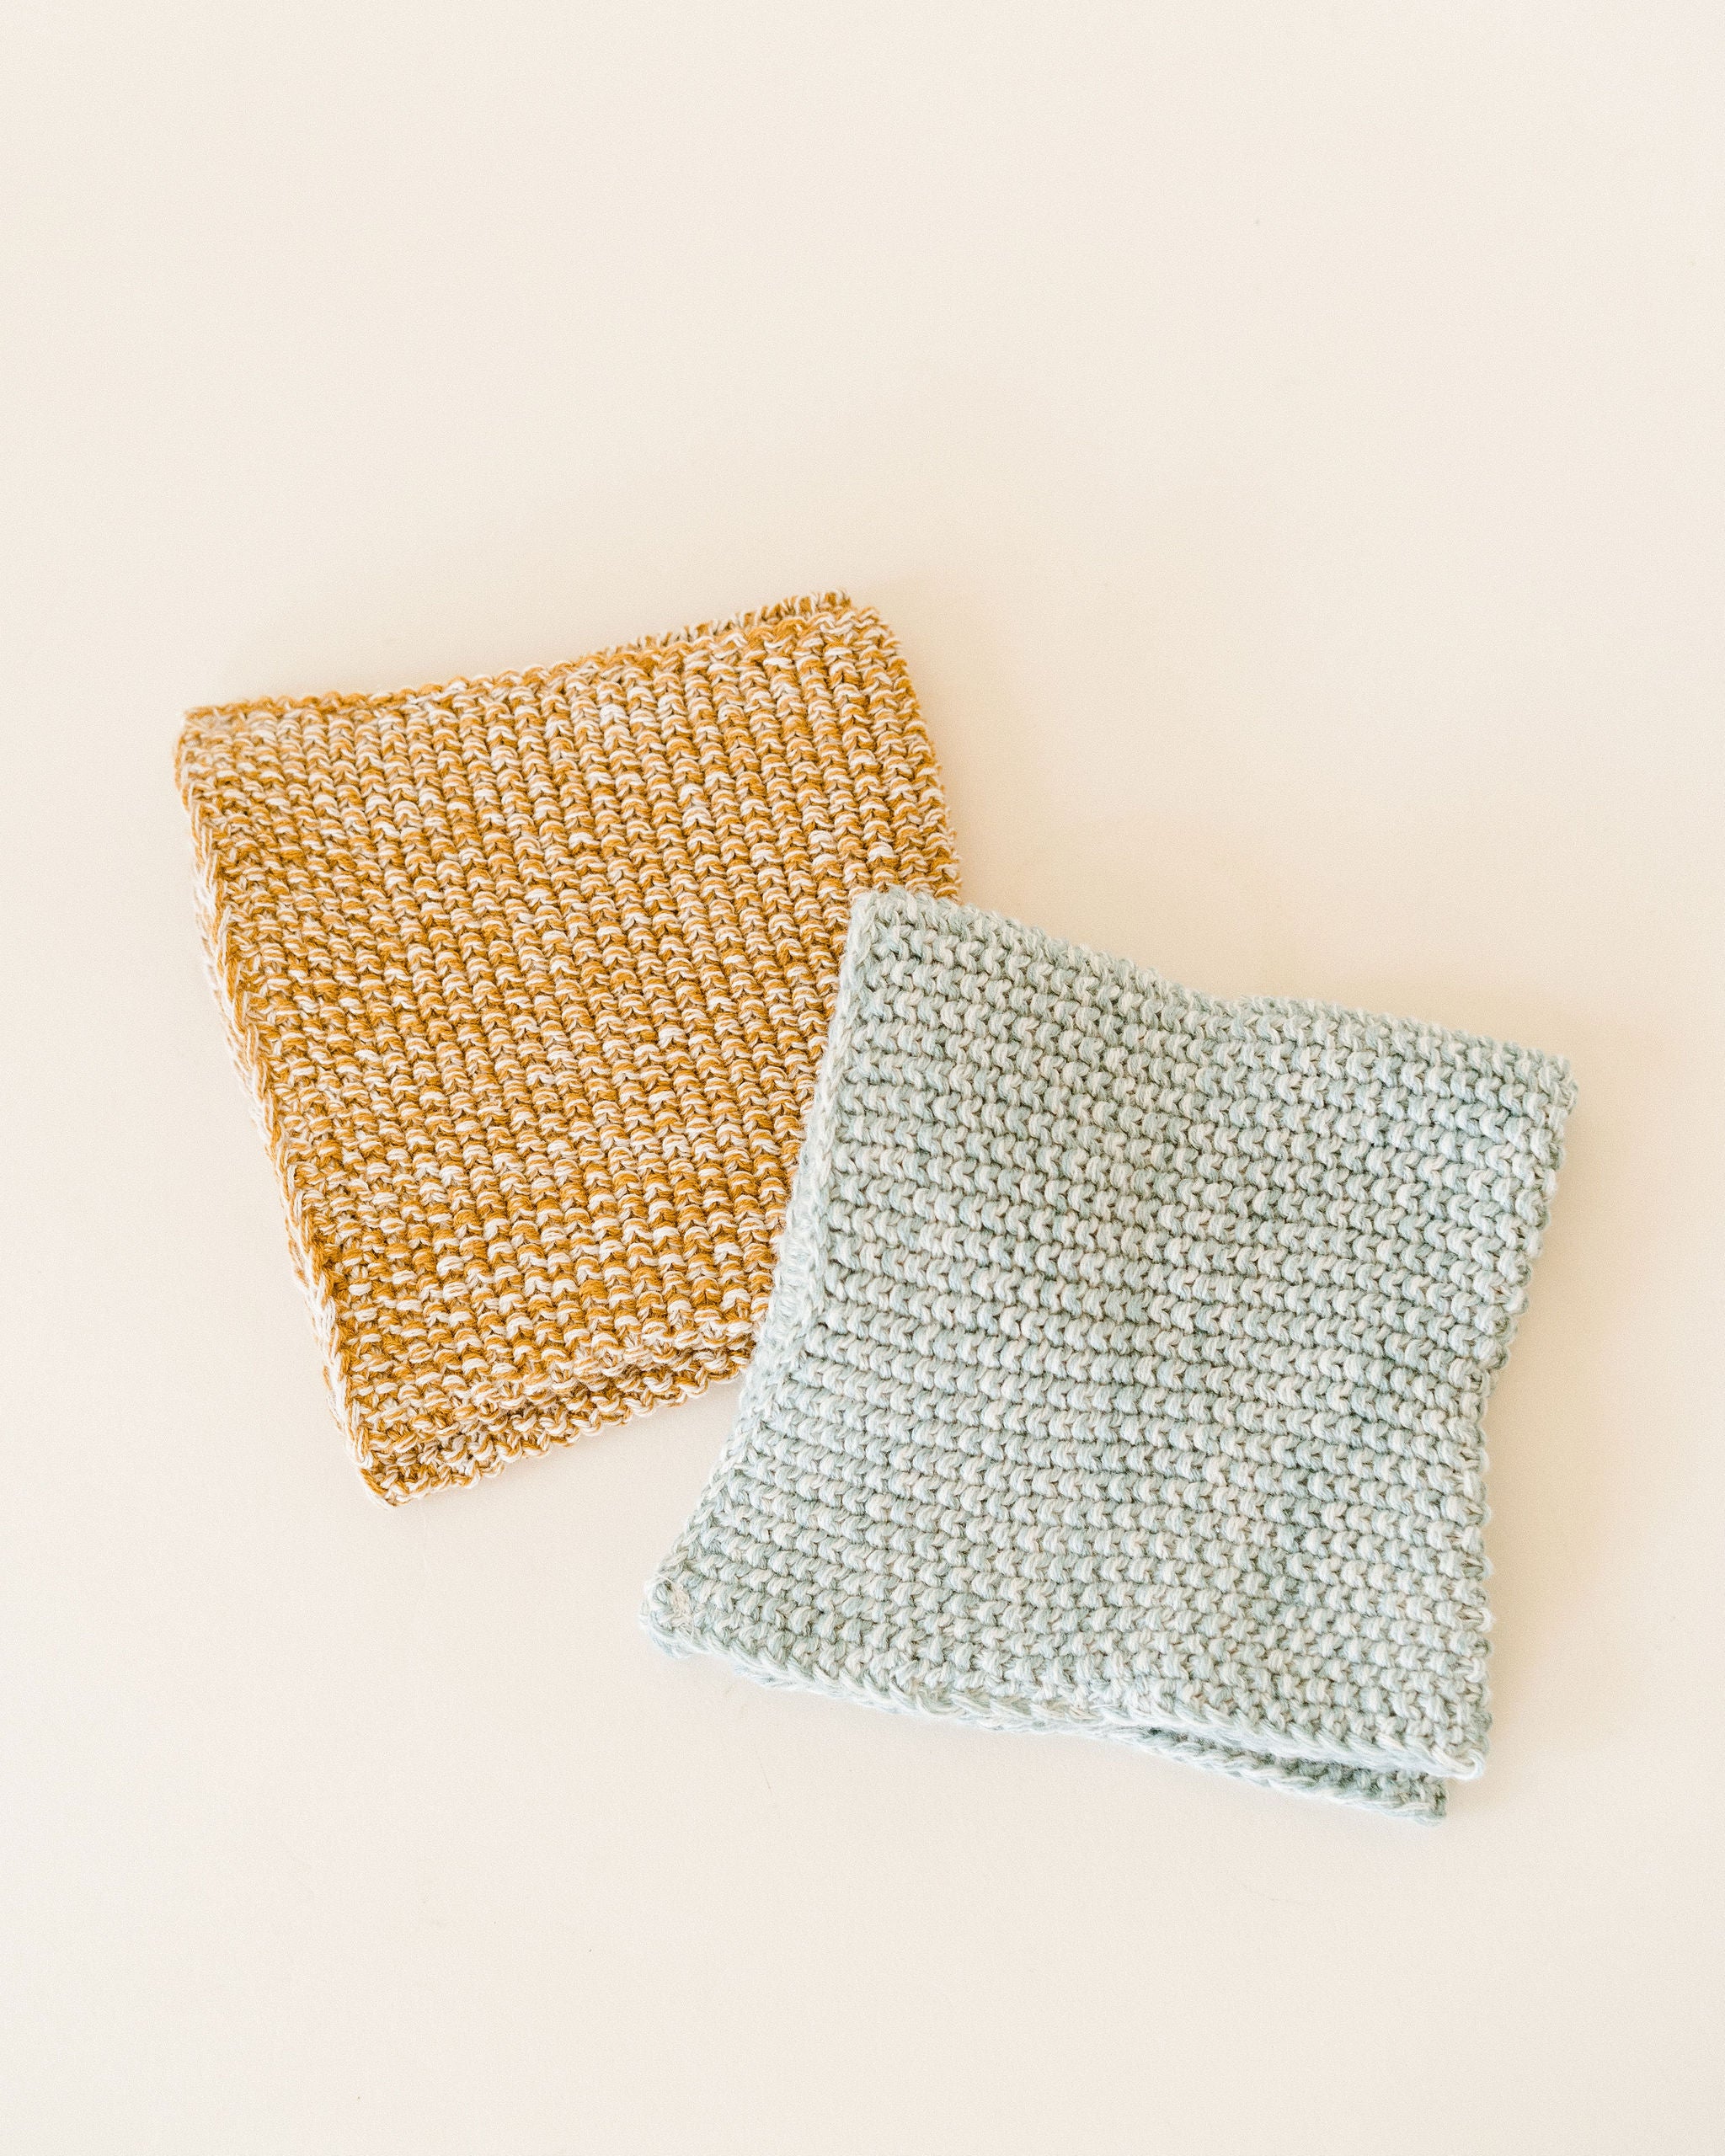 Waffle Weave Dish Cloth w/ Loop - Shop The Butler's Pantry